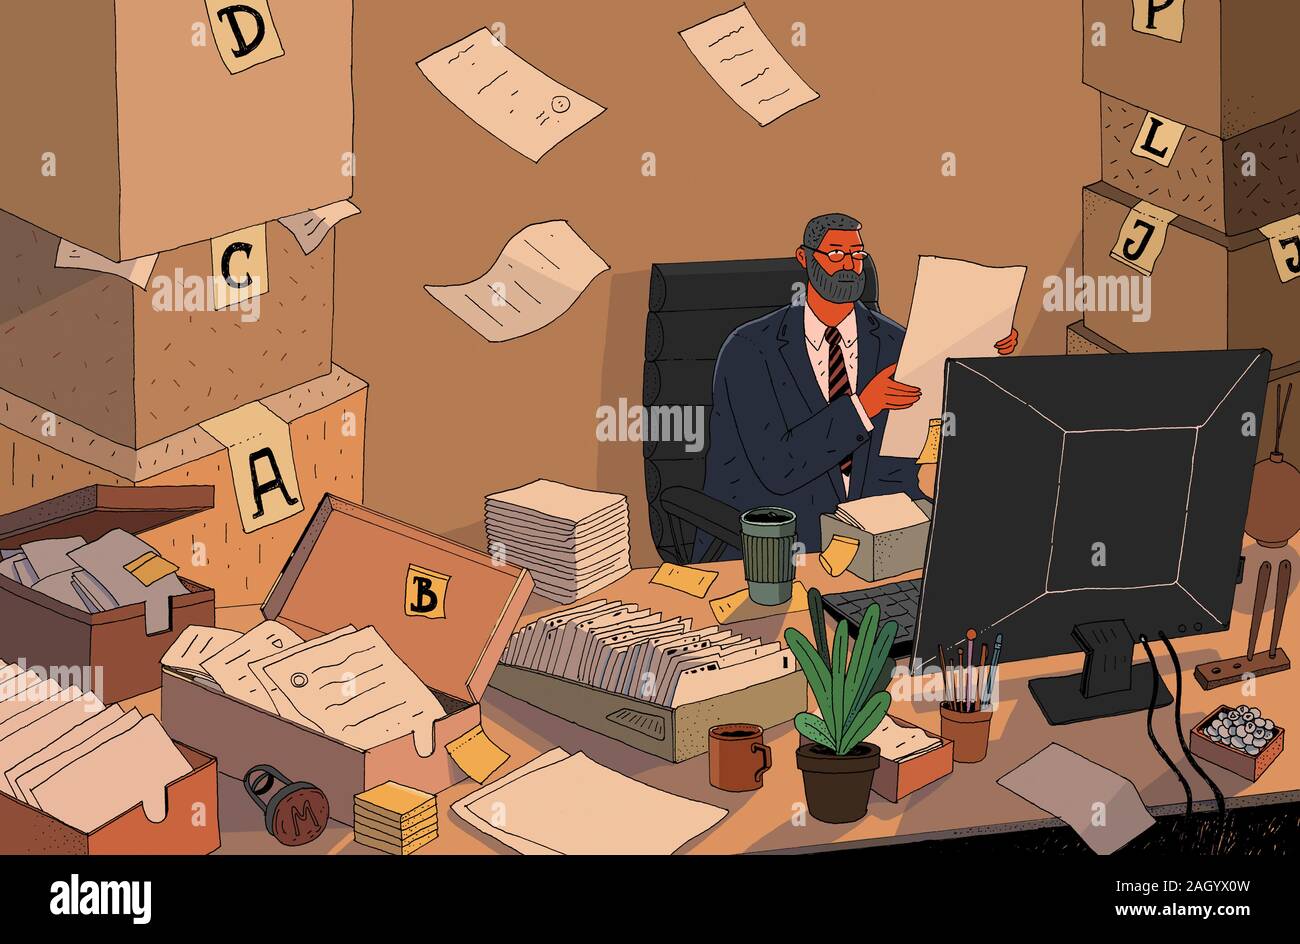 Overworked businessman with piles of paper Stock Photo